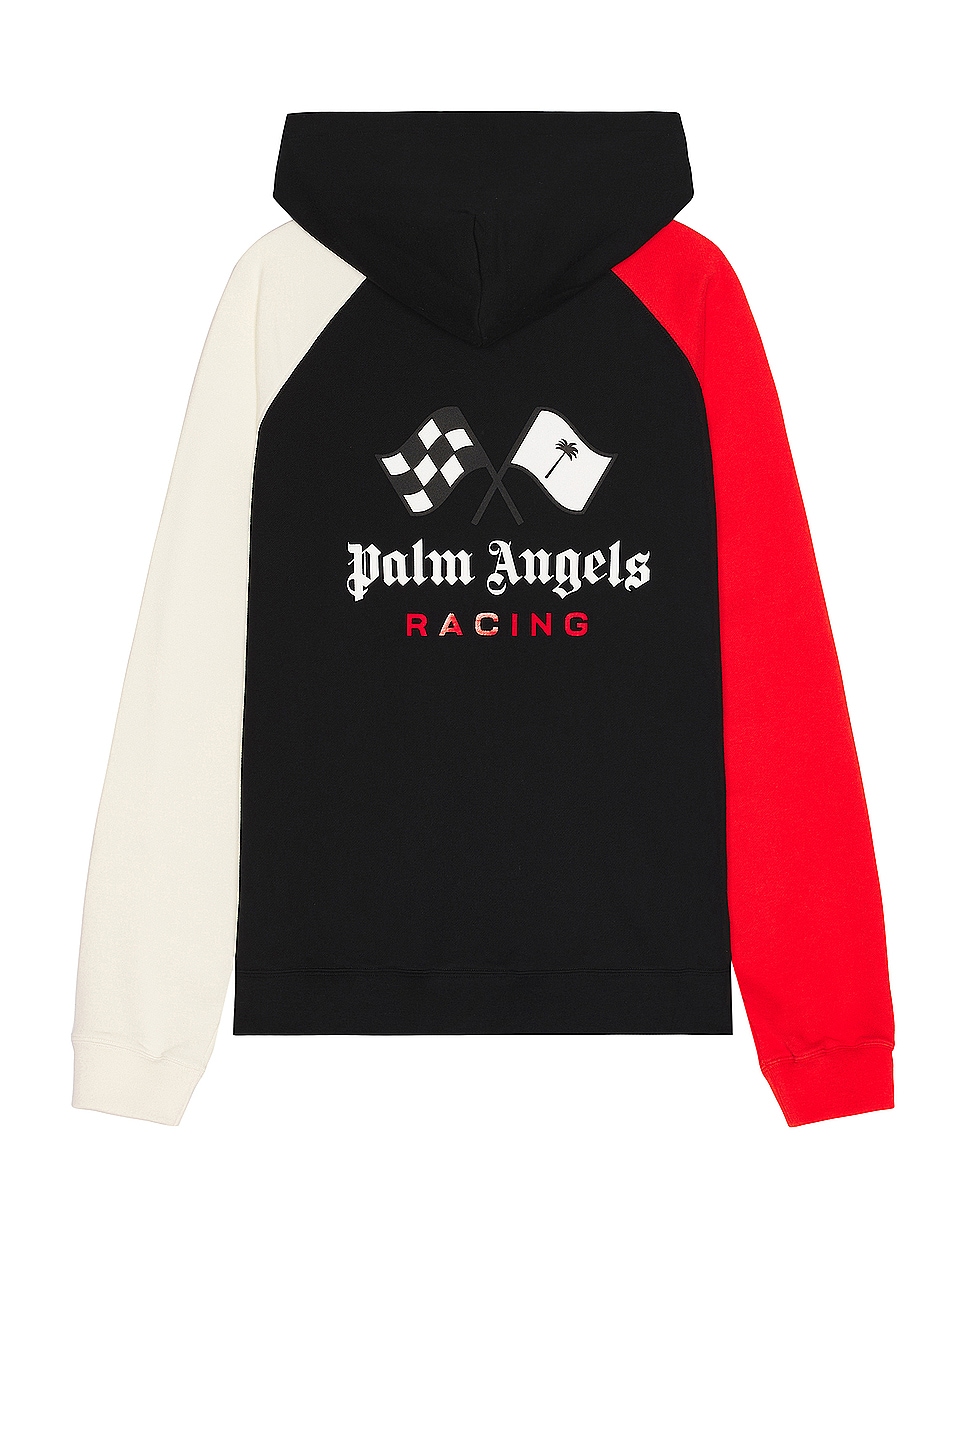 Image 1 of Palm Angels X Formula 1 Racing Hoodie in Black, White, & Red